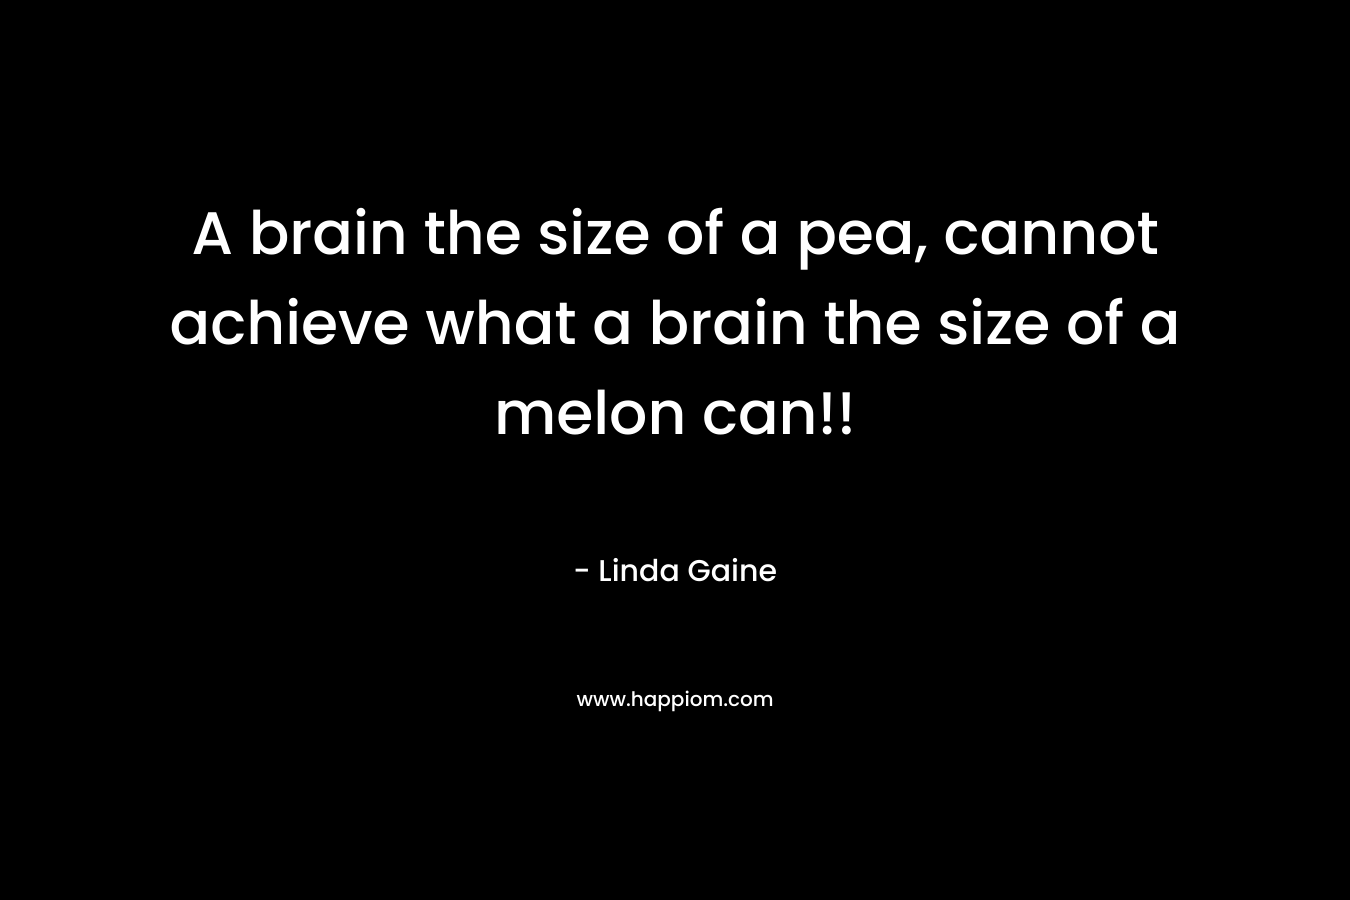 A brain the size of a pea, cannot achieve what a brain the size of a melon can!!